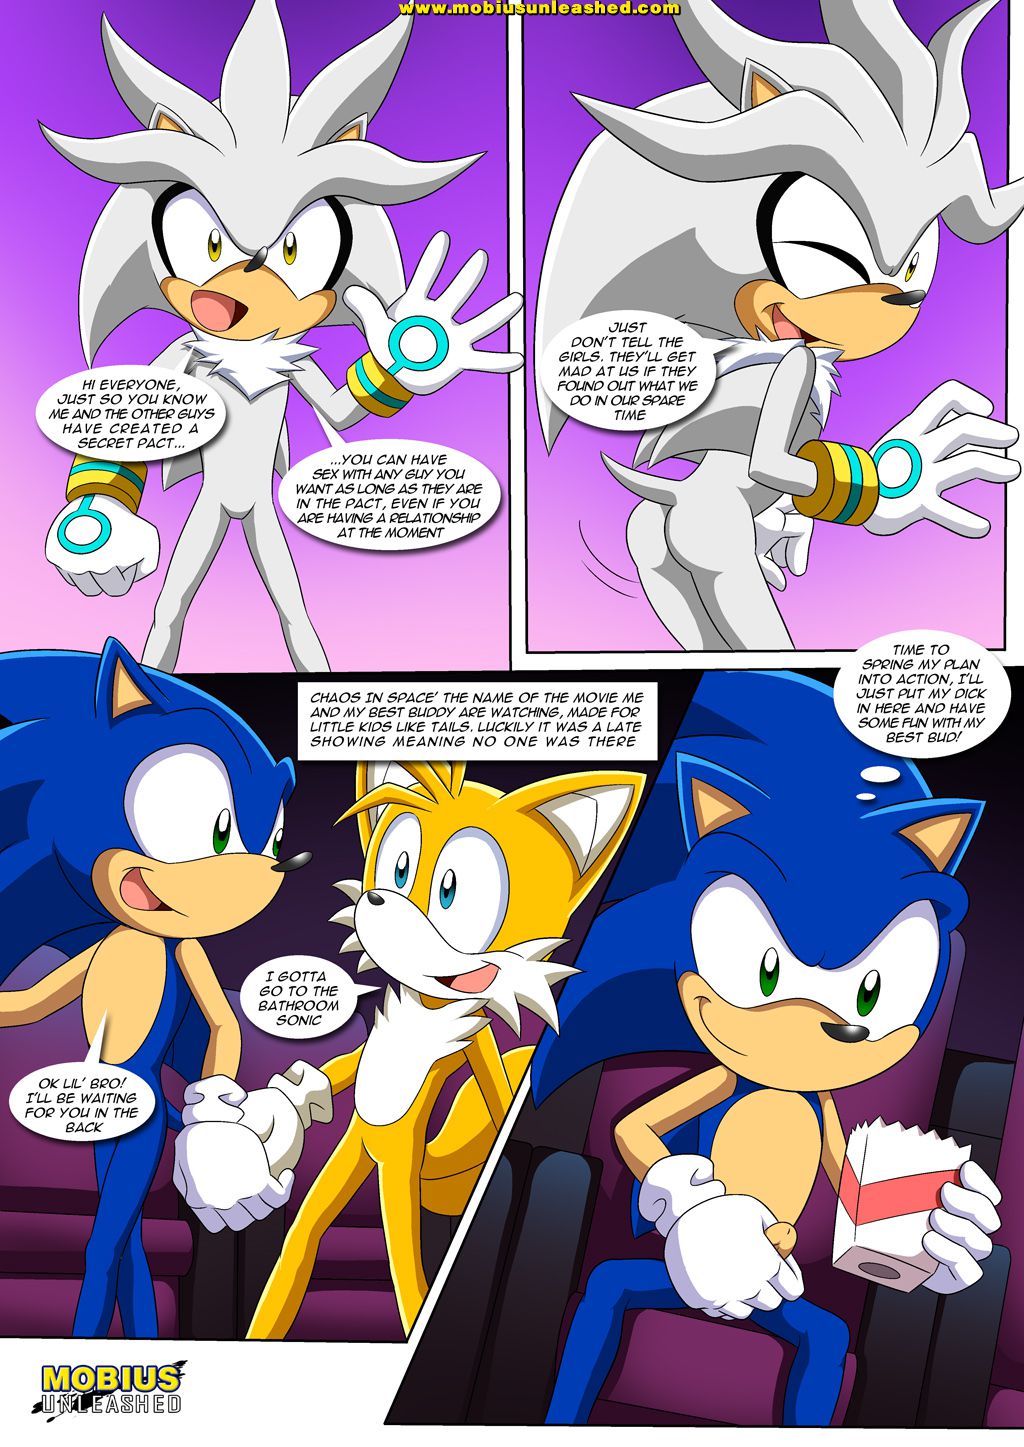 [Palcomix] The Pact 2 (Sonic The Hedgehog) [Ongoing] 2